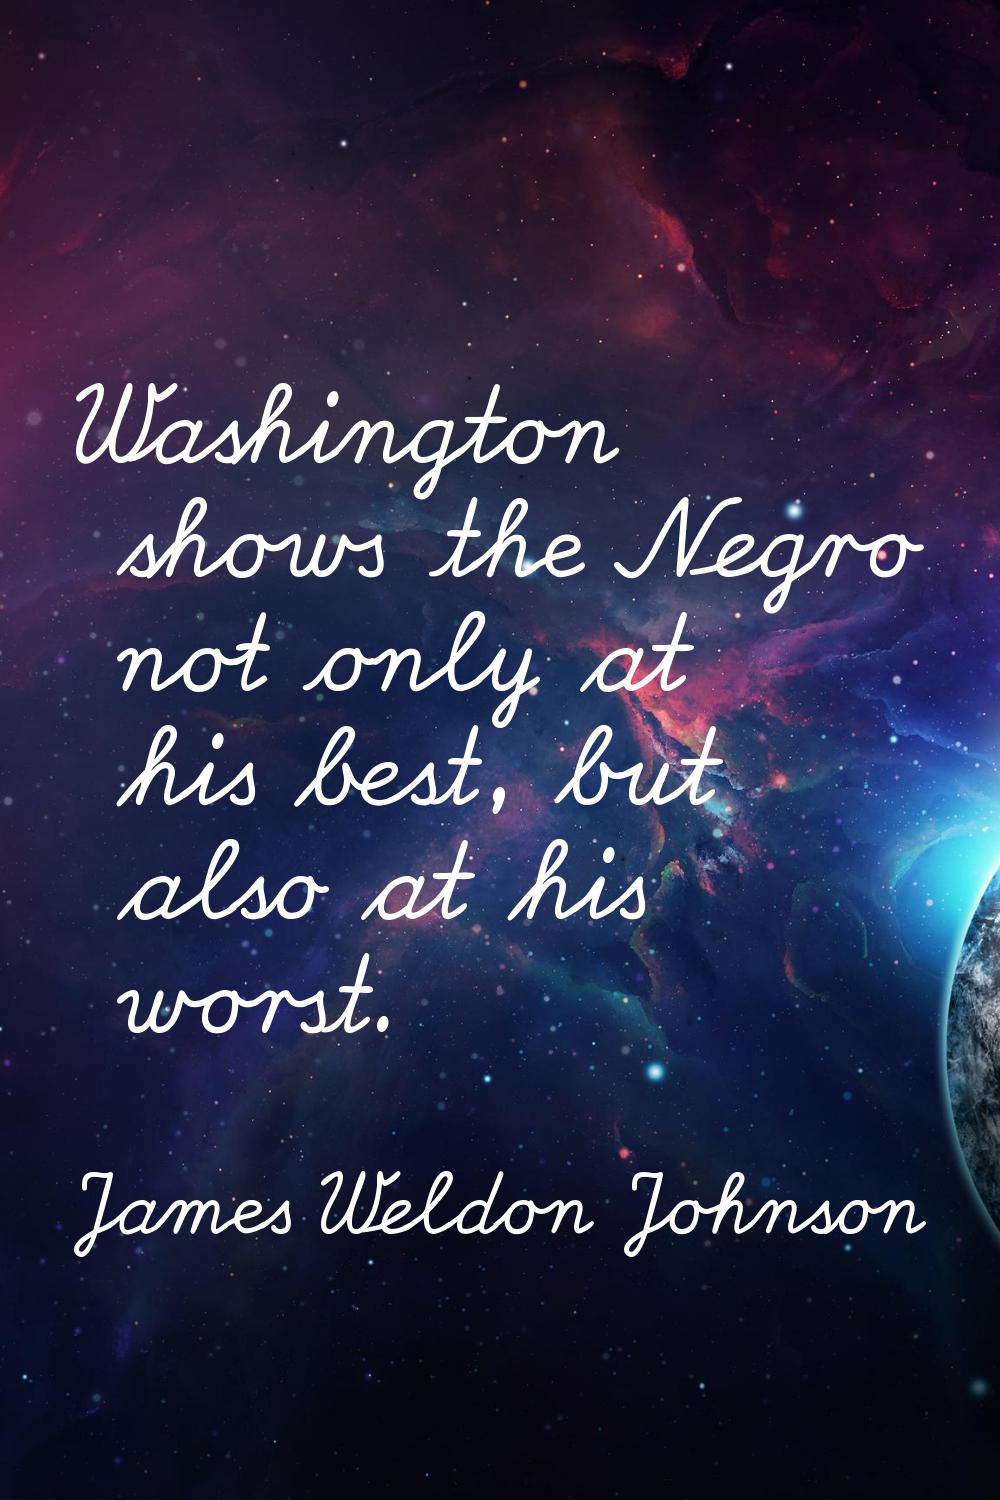 Washington shows the Negro not only at his best, but also at his worst.